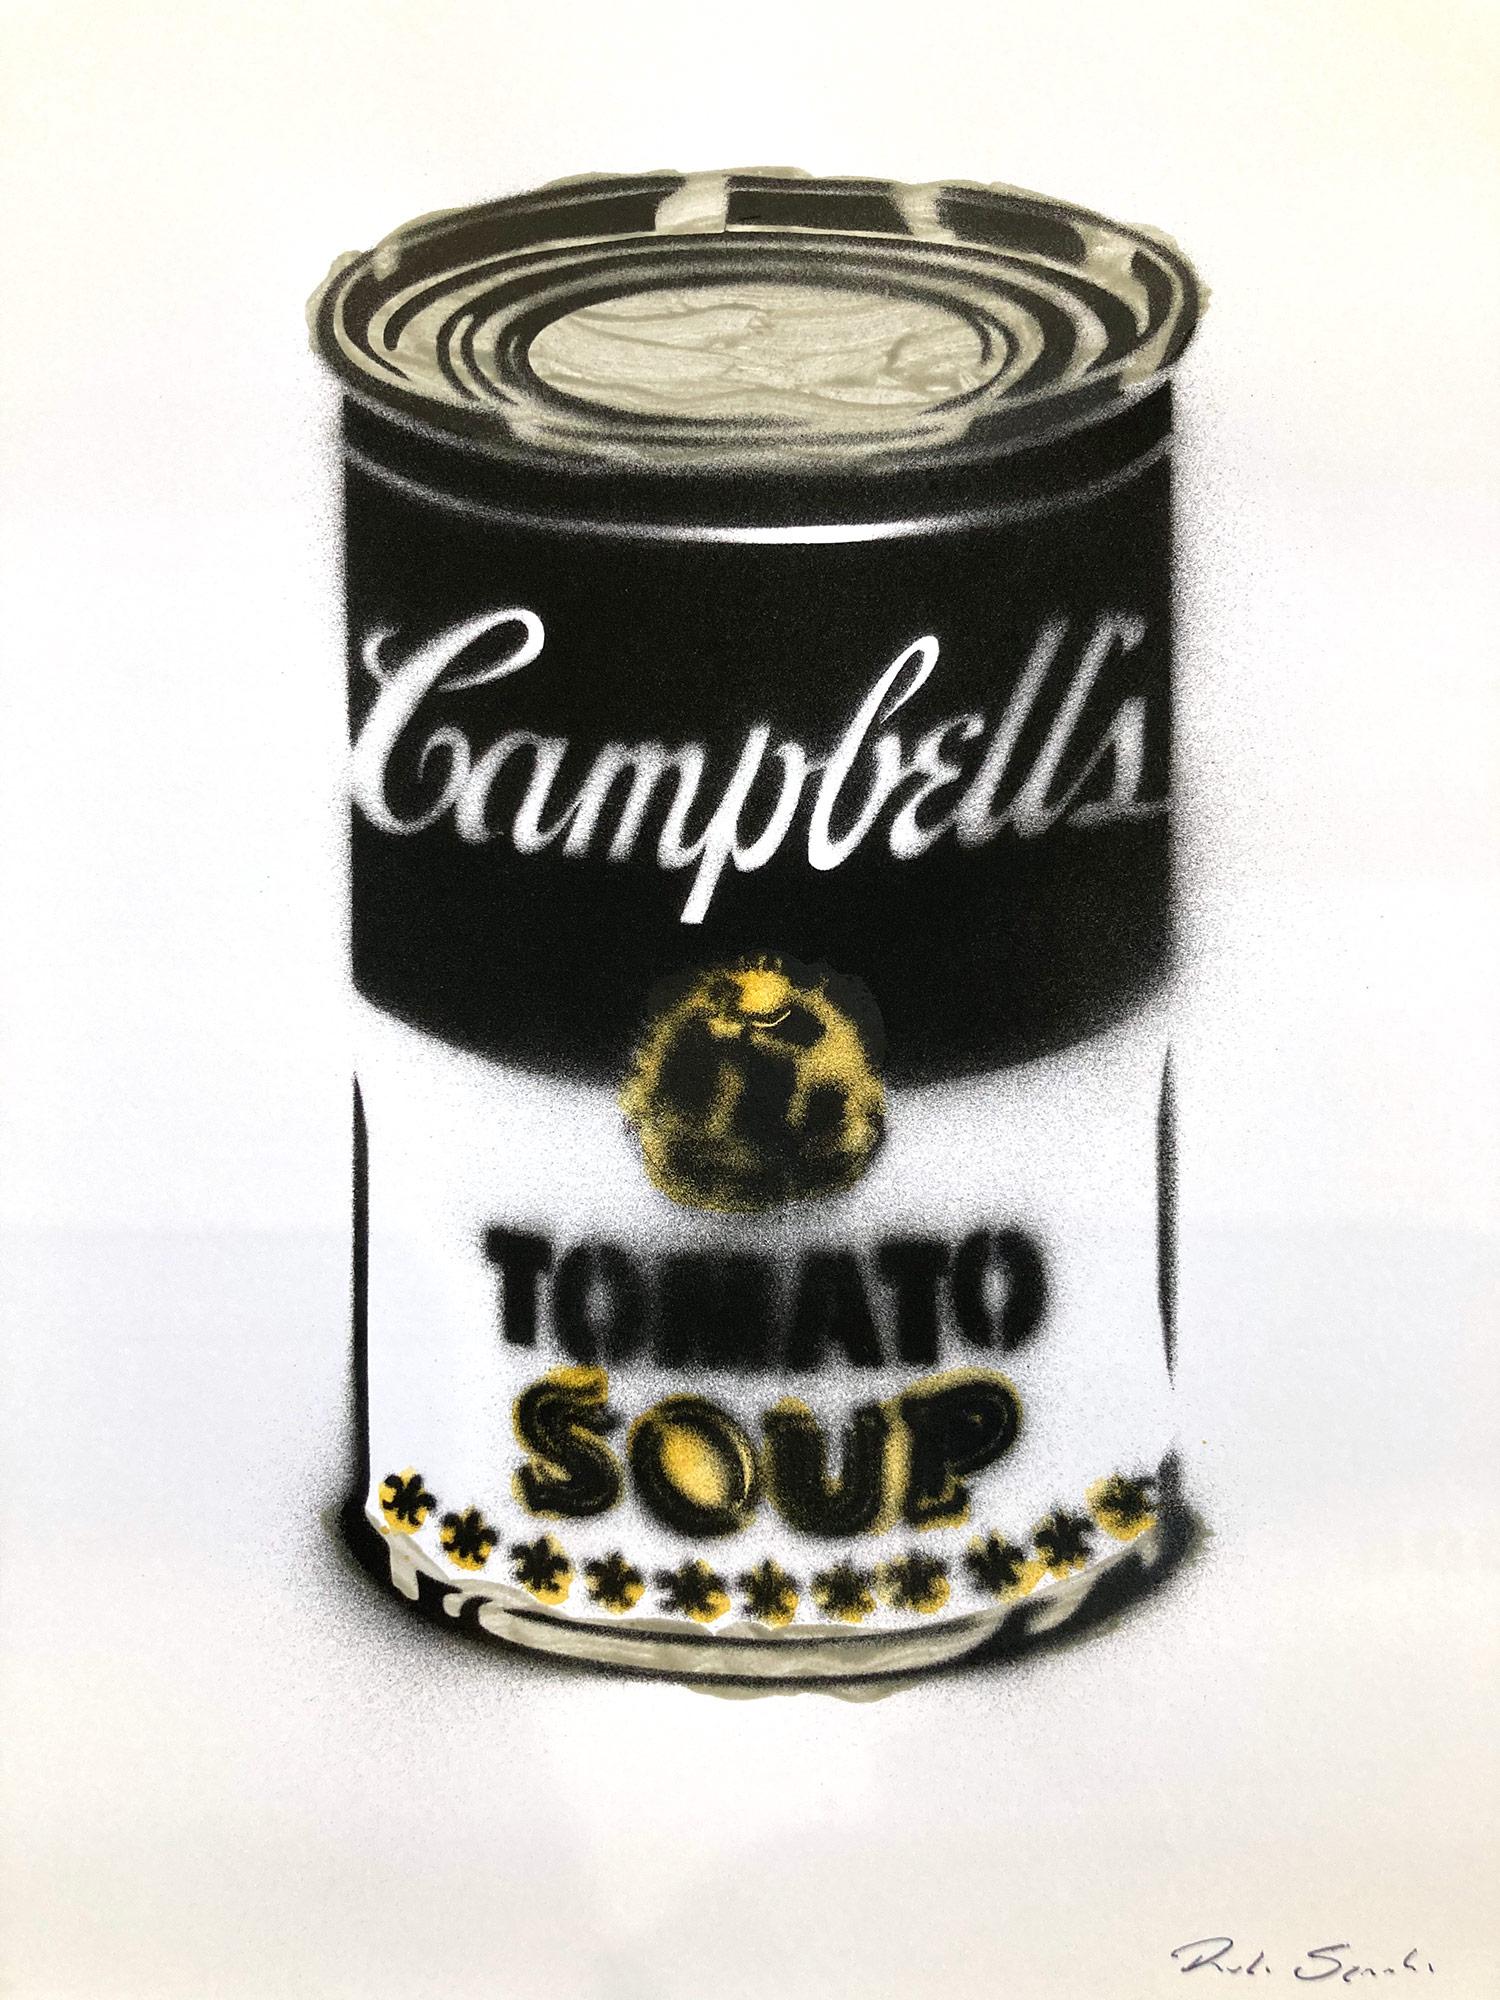 Rudi Sgarbi Abstract Sculpture - "Campbell's Tomato Soup" After Andy Warhol Tomato Soup Stencil on Archival Paper